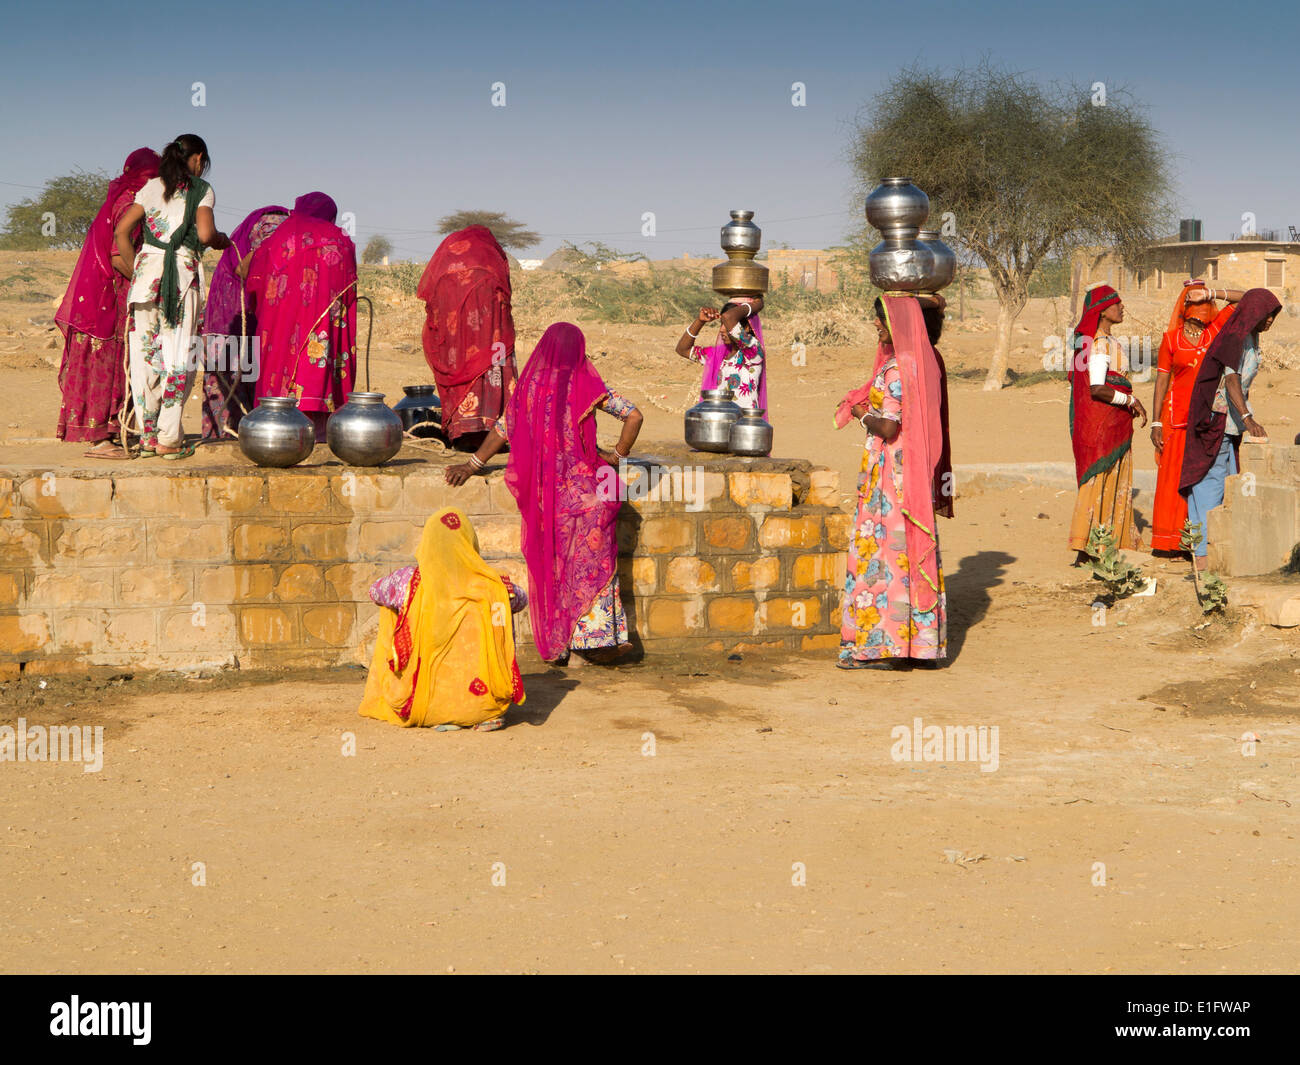 India, Rajasthan, Jaisalmer, Thar Desert, Khuri, women dressed in colourful saris collecting water from village well Stock Photo